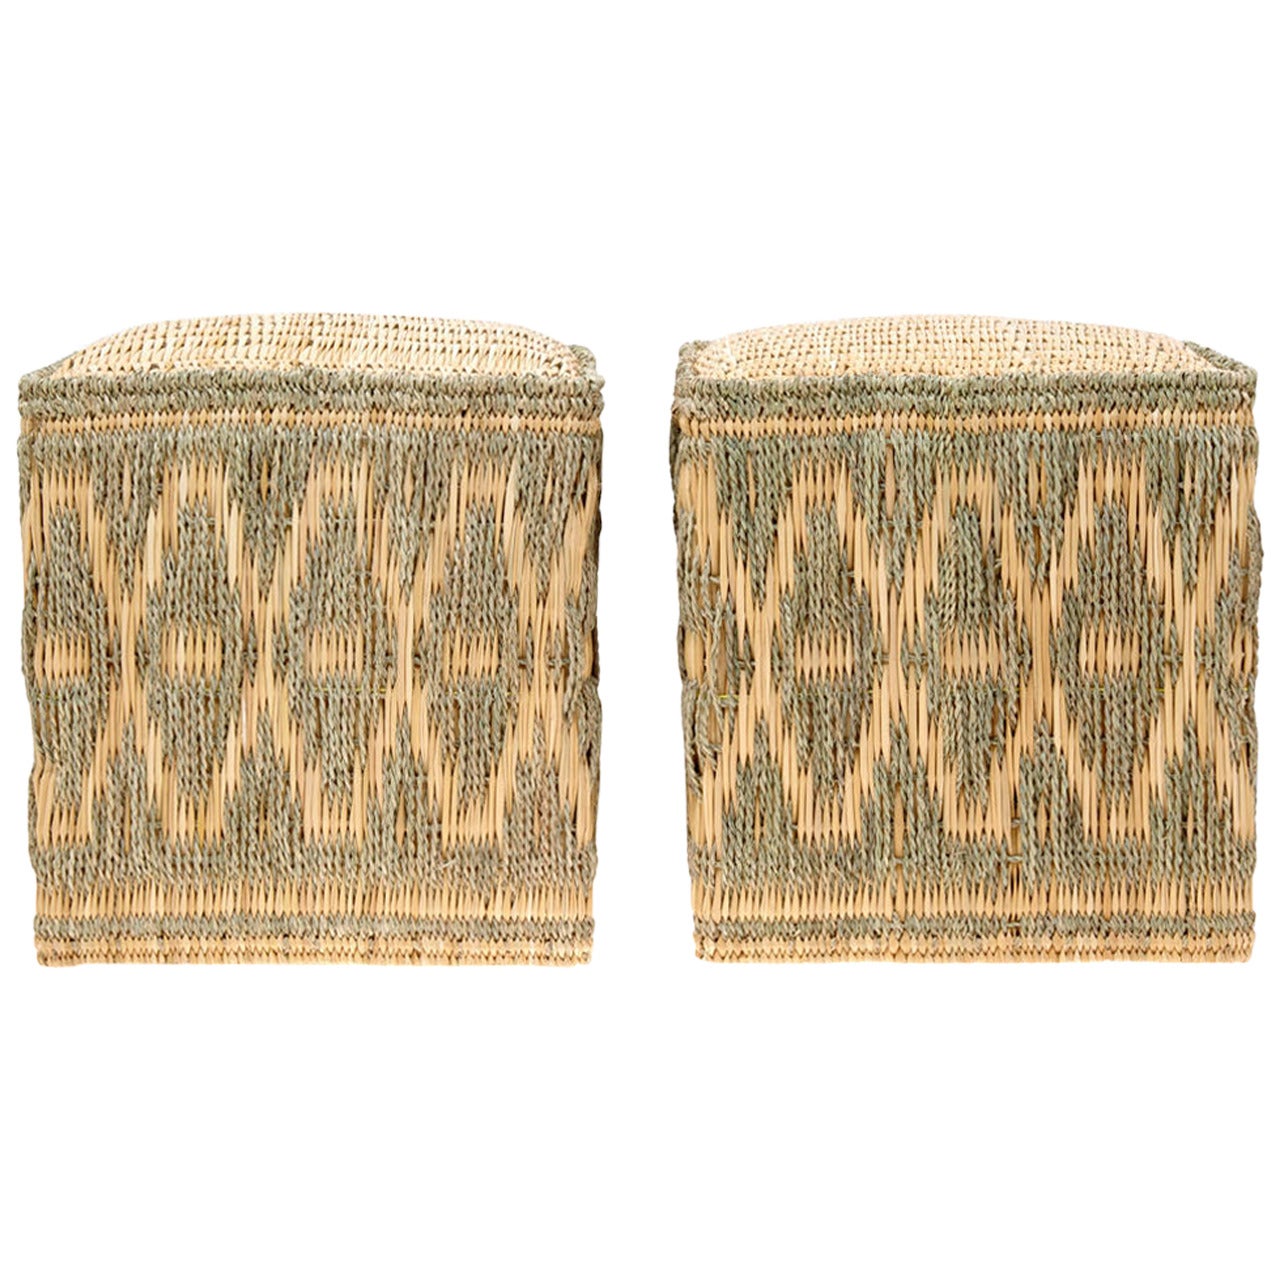 Pair of Wicker Stools with Cord Decorations For Sale